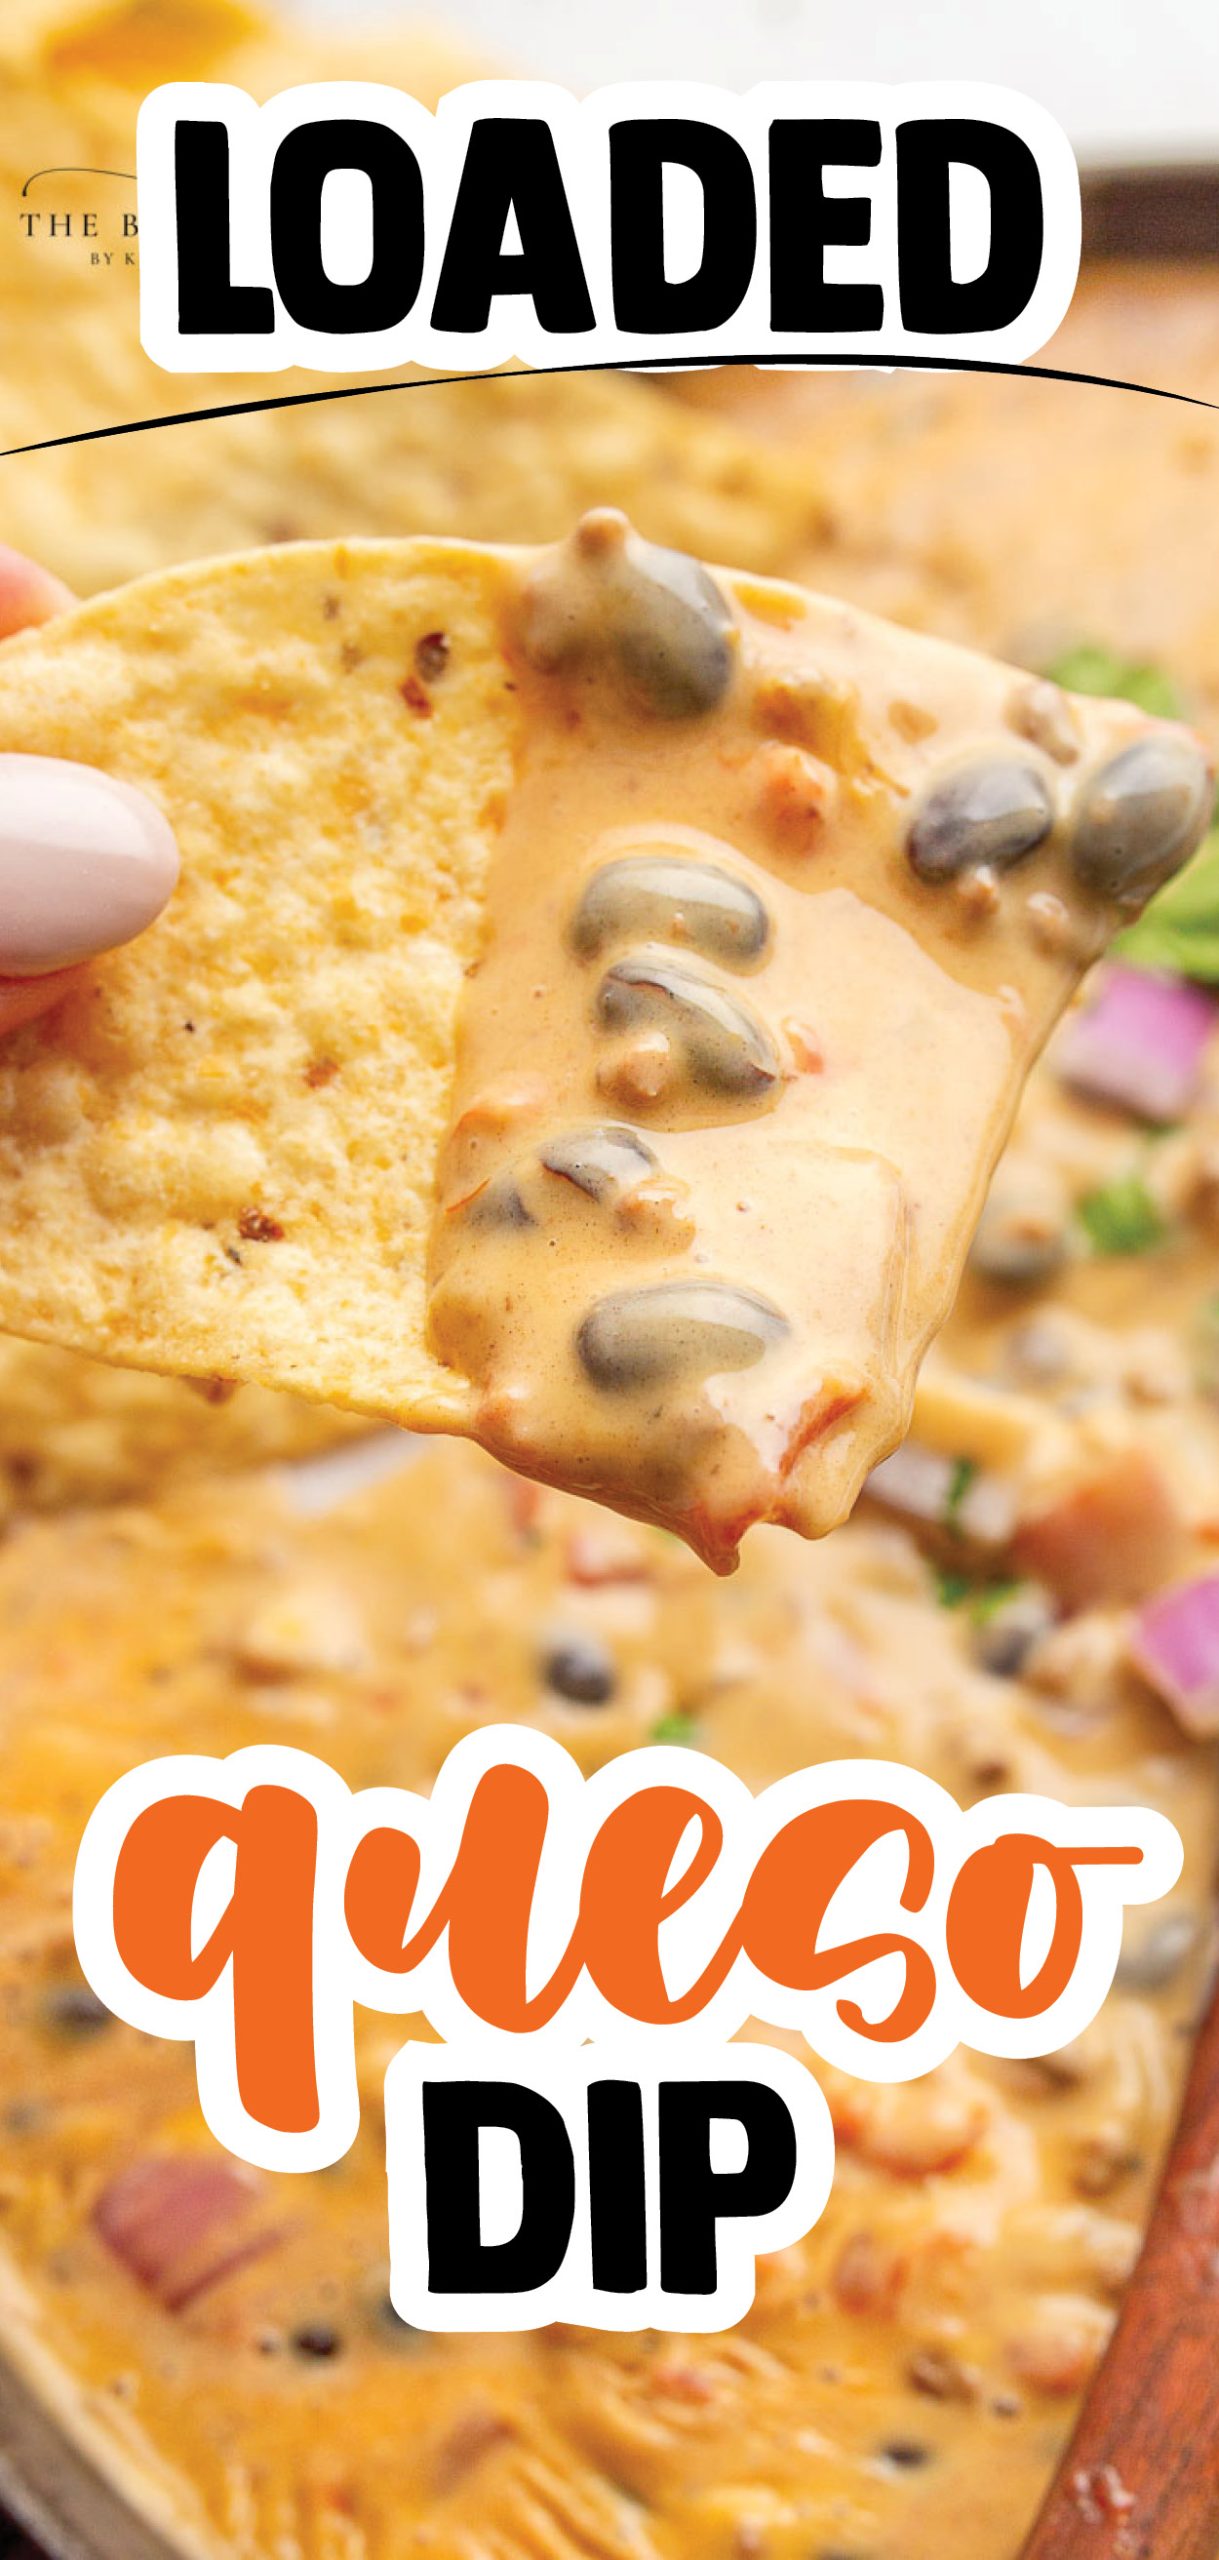 Loaded Queso Dip is full of flavor, packed with beef, beans, cheese, and even beer! Perfect appetizer with chips at parties or on game day! This recipe has it all and is the ultimate chip dip. 